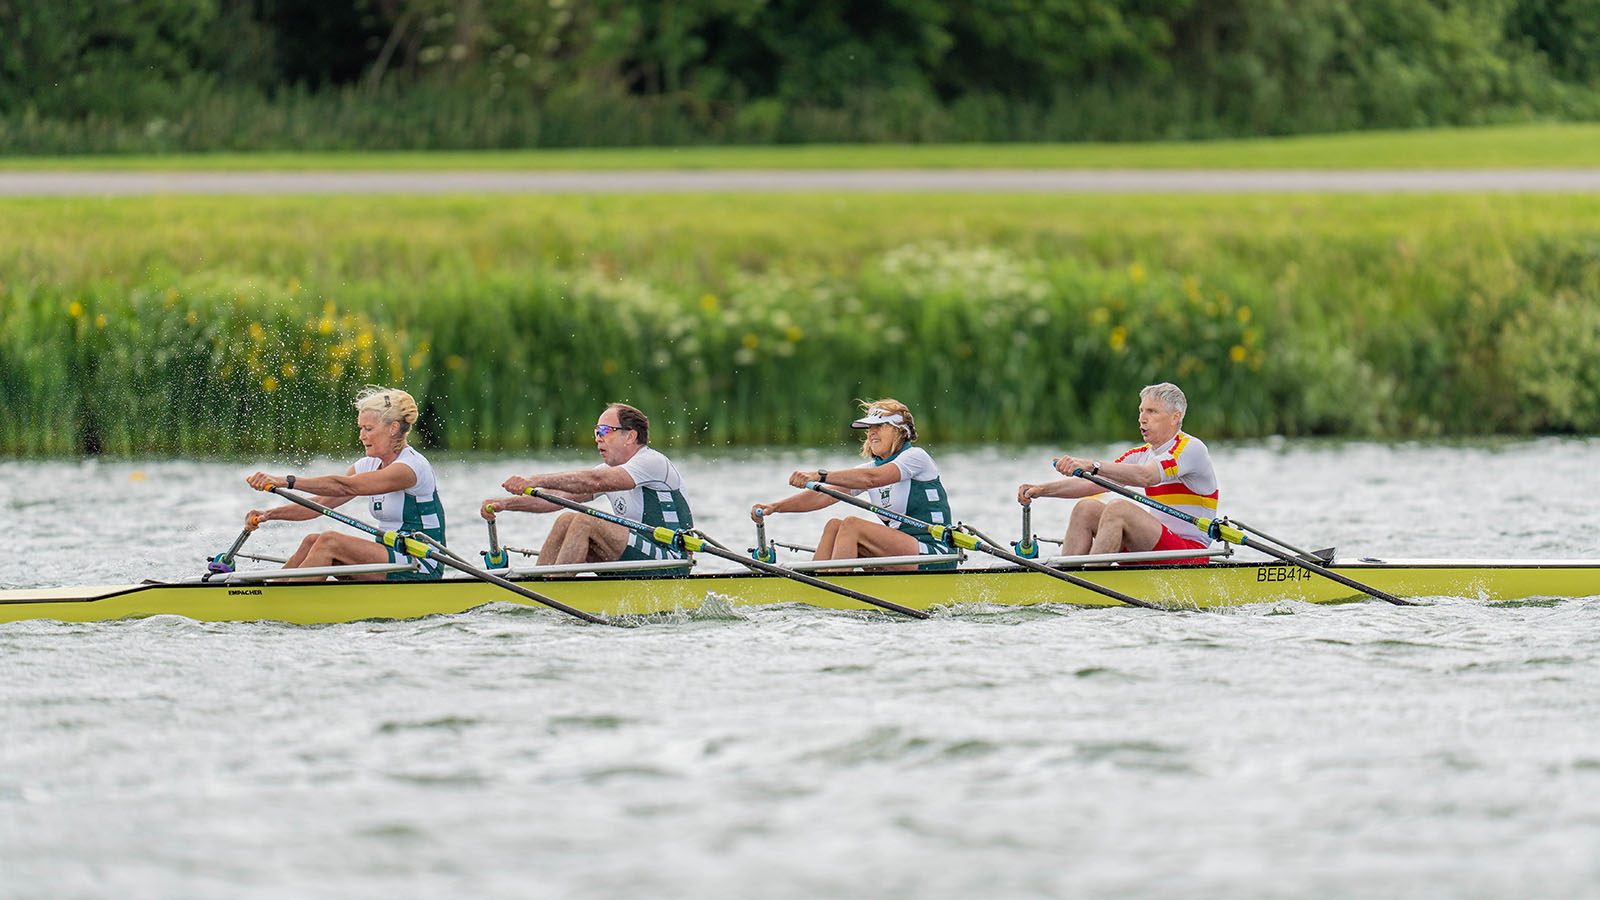 Date announced for the British Rowing Masters Championships 2023